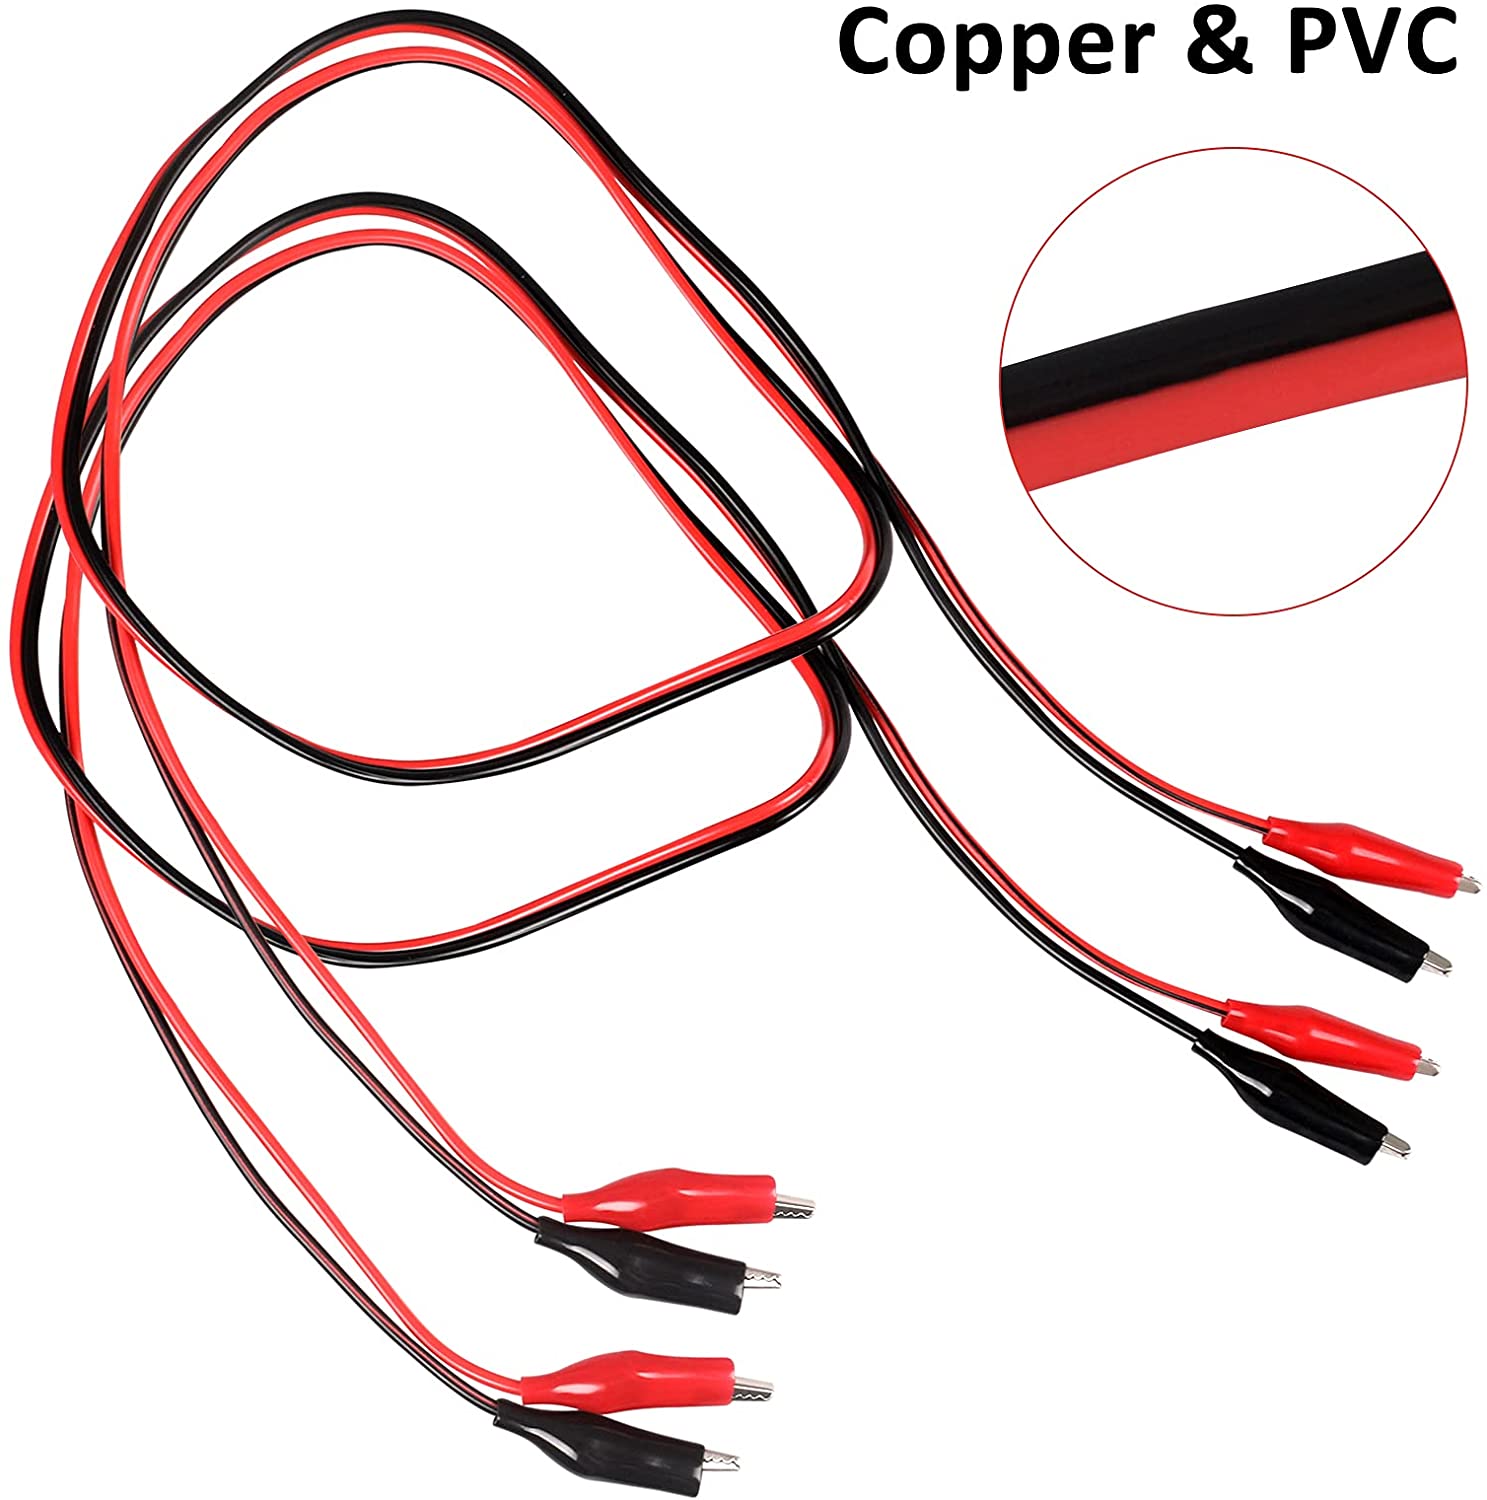 (Red+Black) Alligator Crocodile Clips Electrical Test Lead Wire - 60cm (Pair)